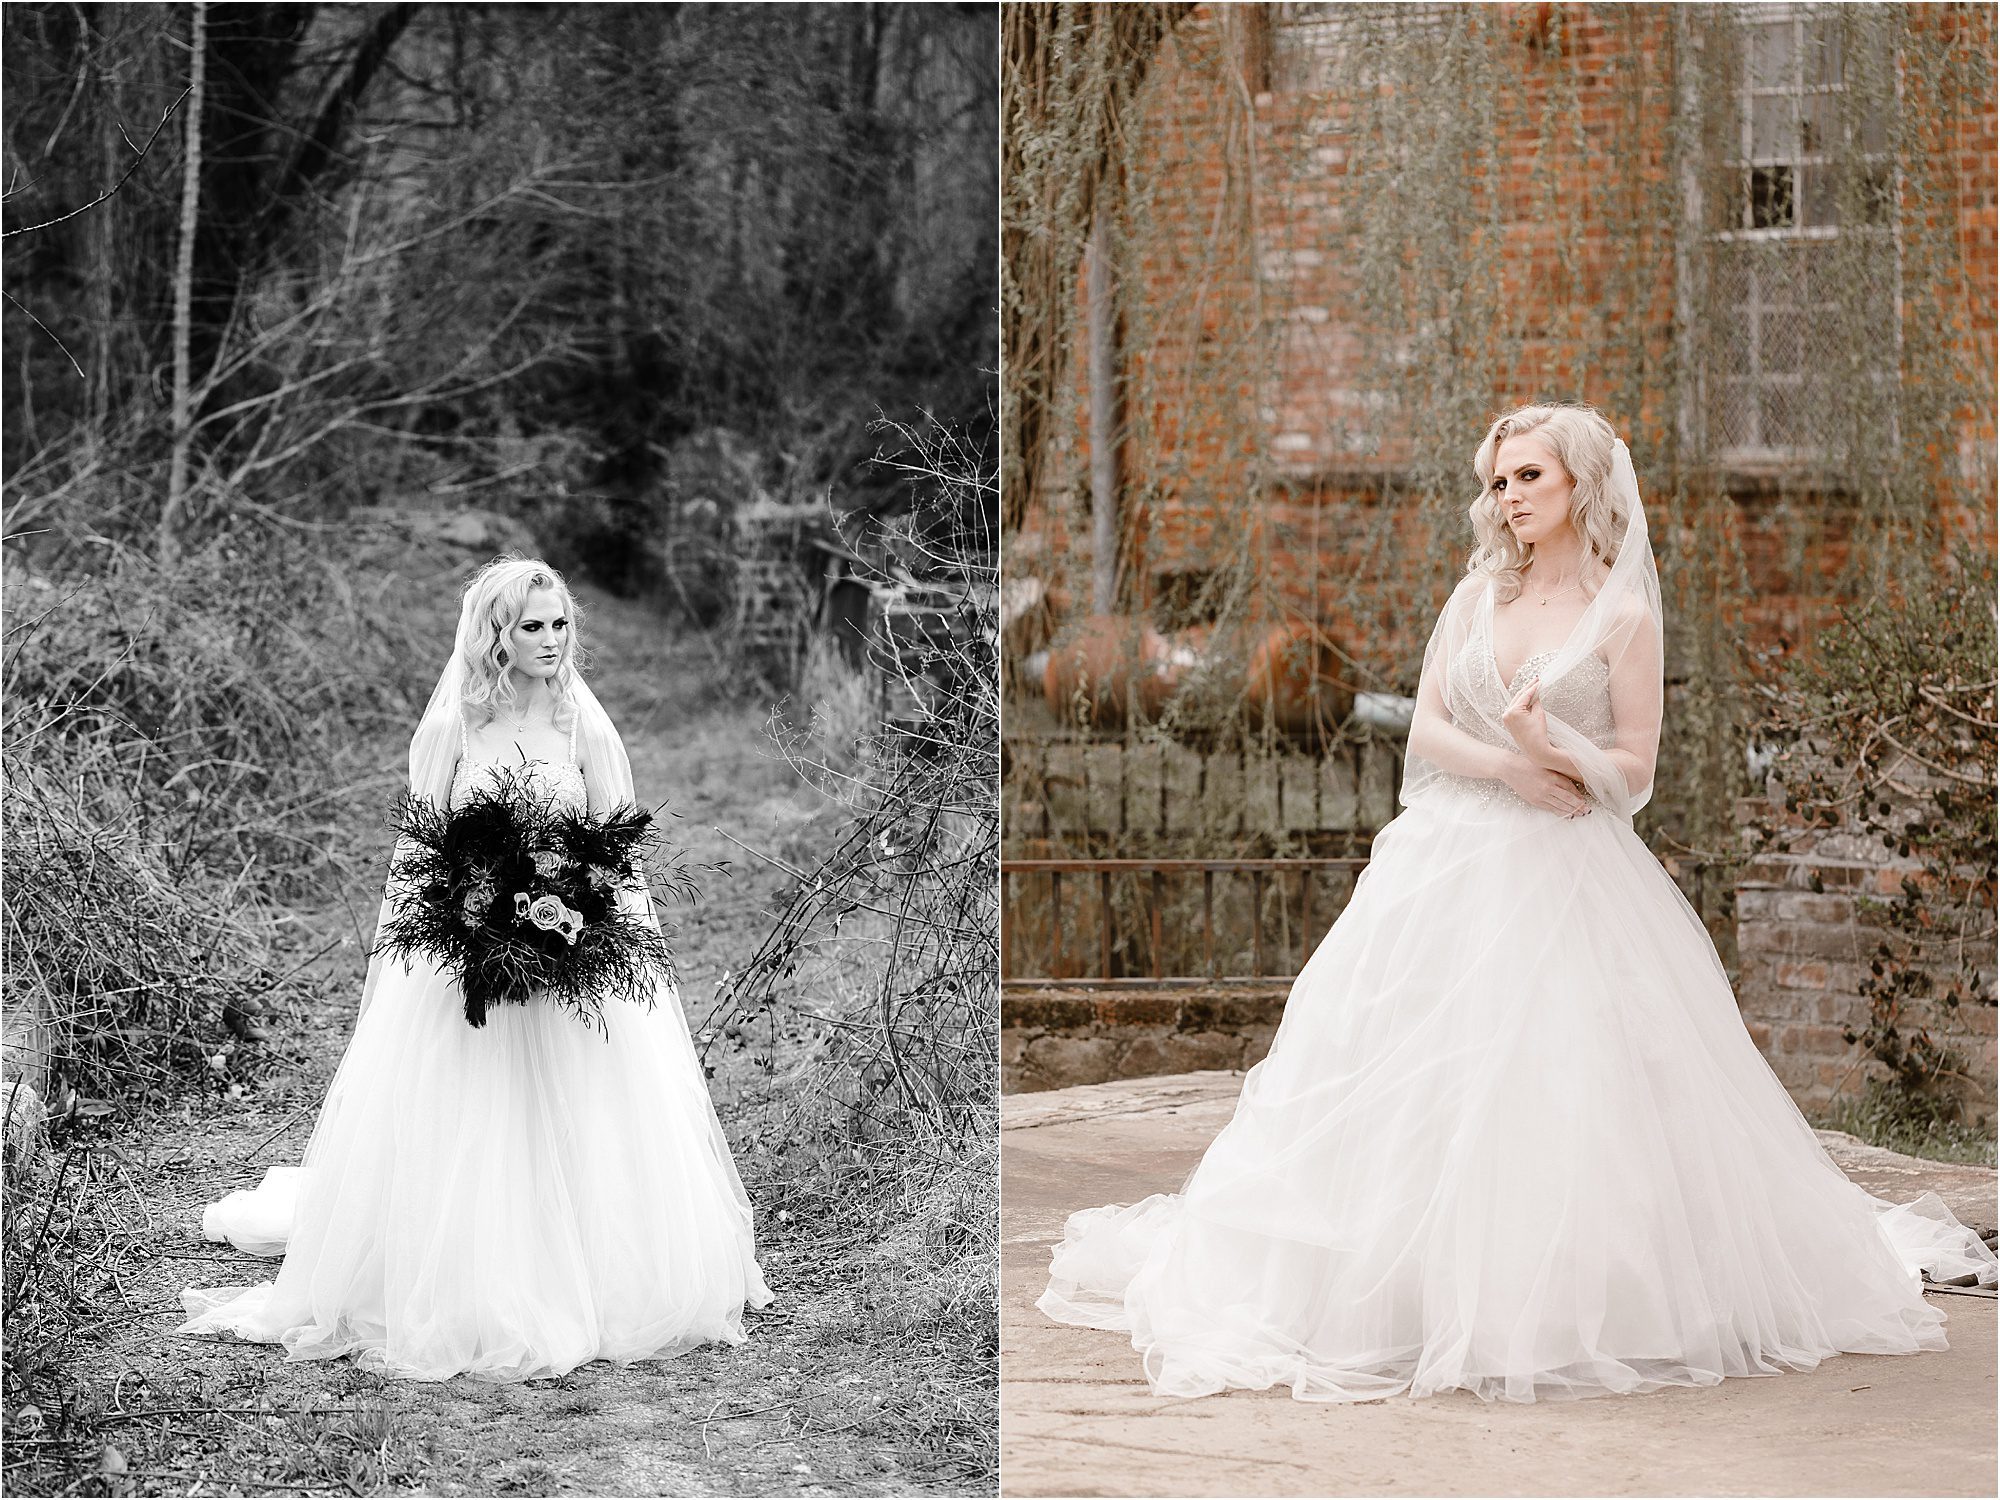 Halloween bridal photos at Sally & Jack wedding in Tennessee